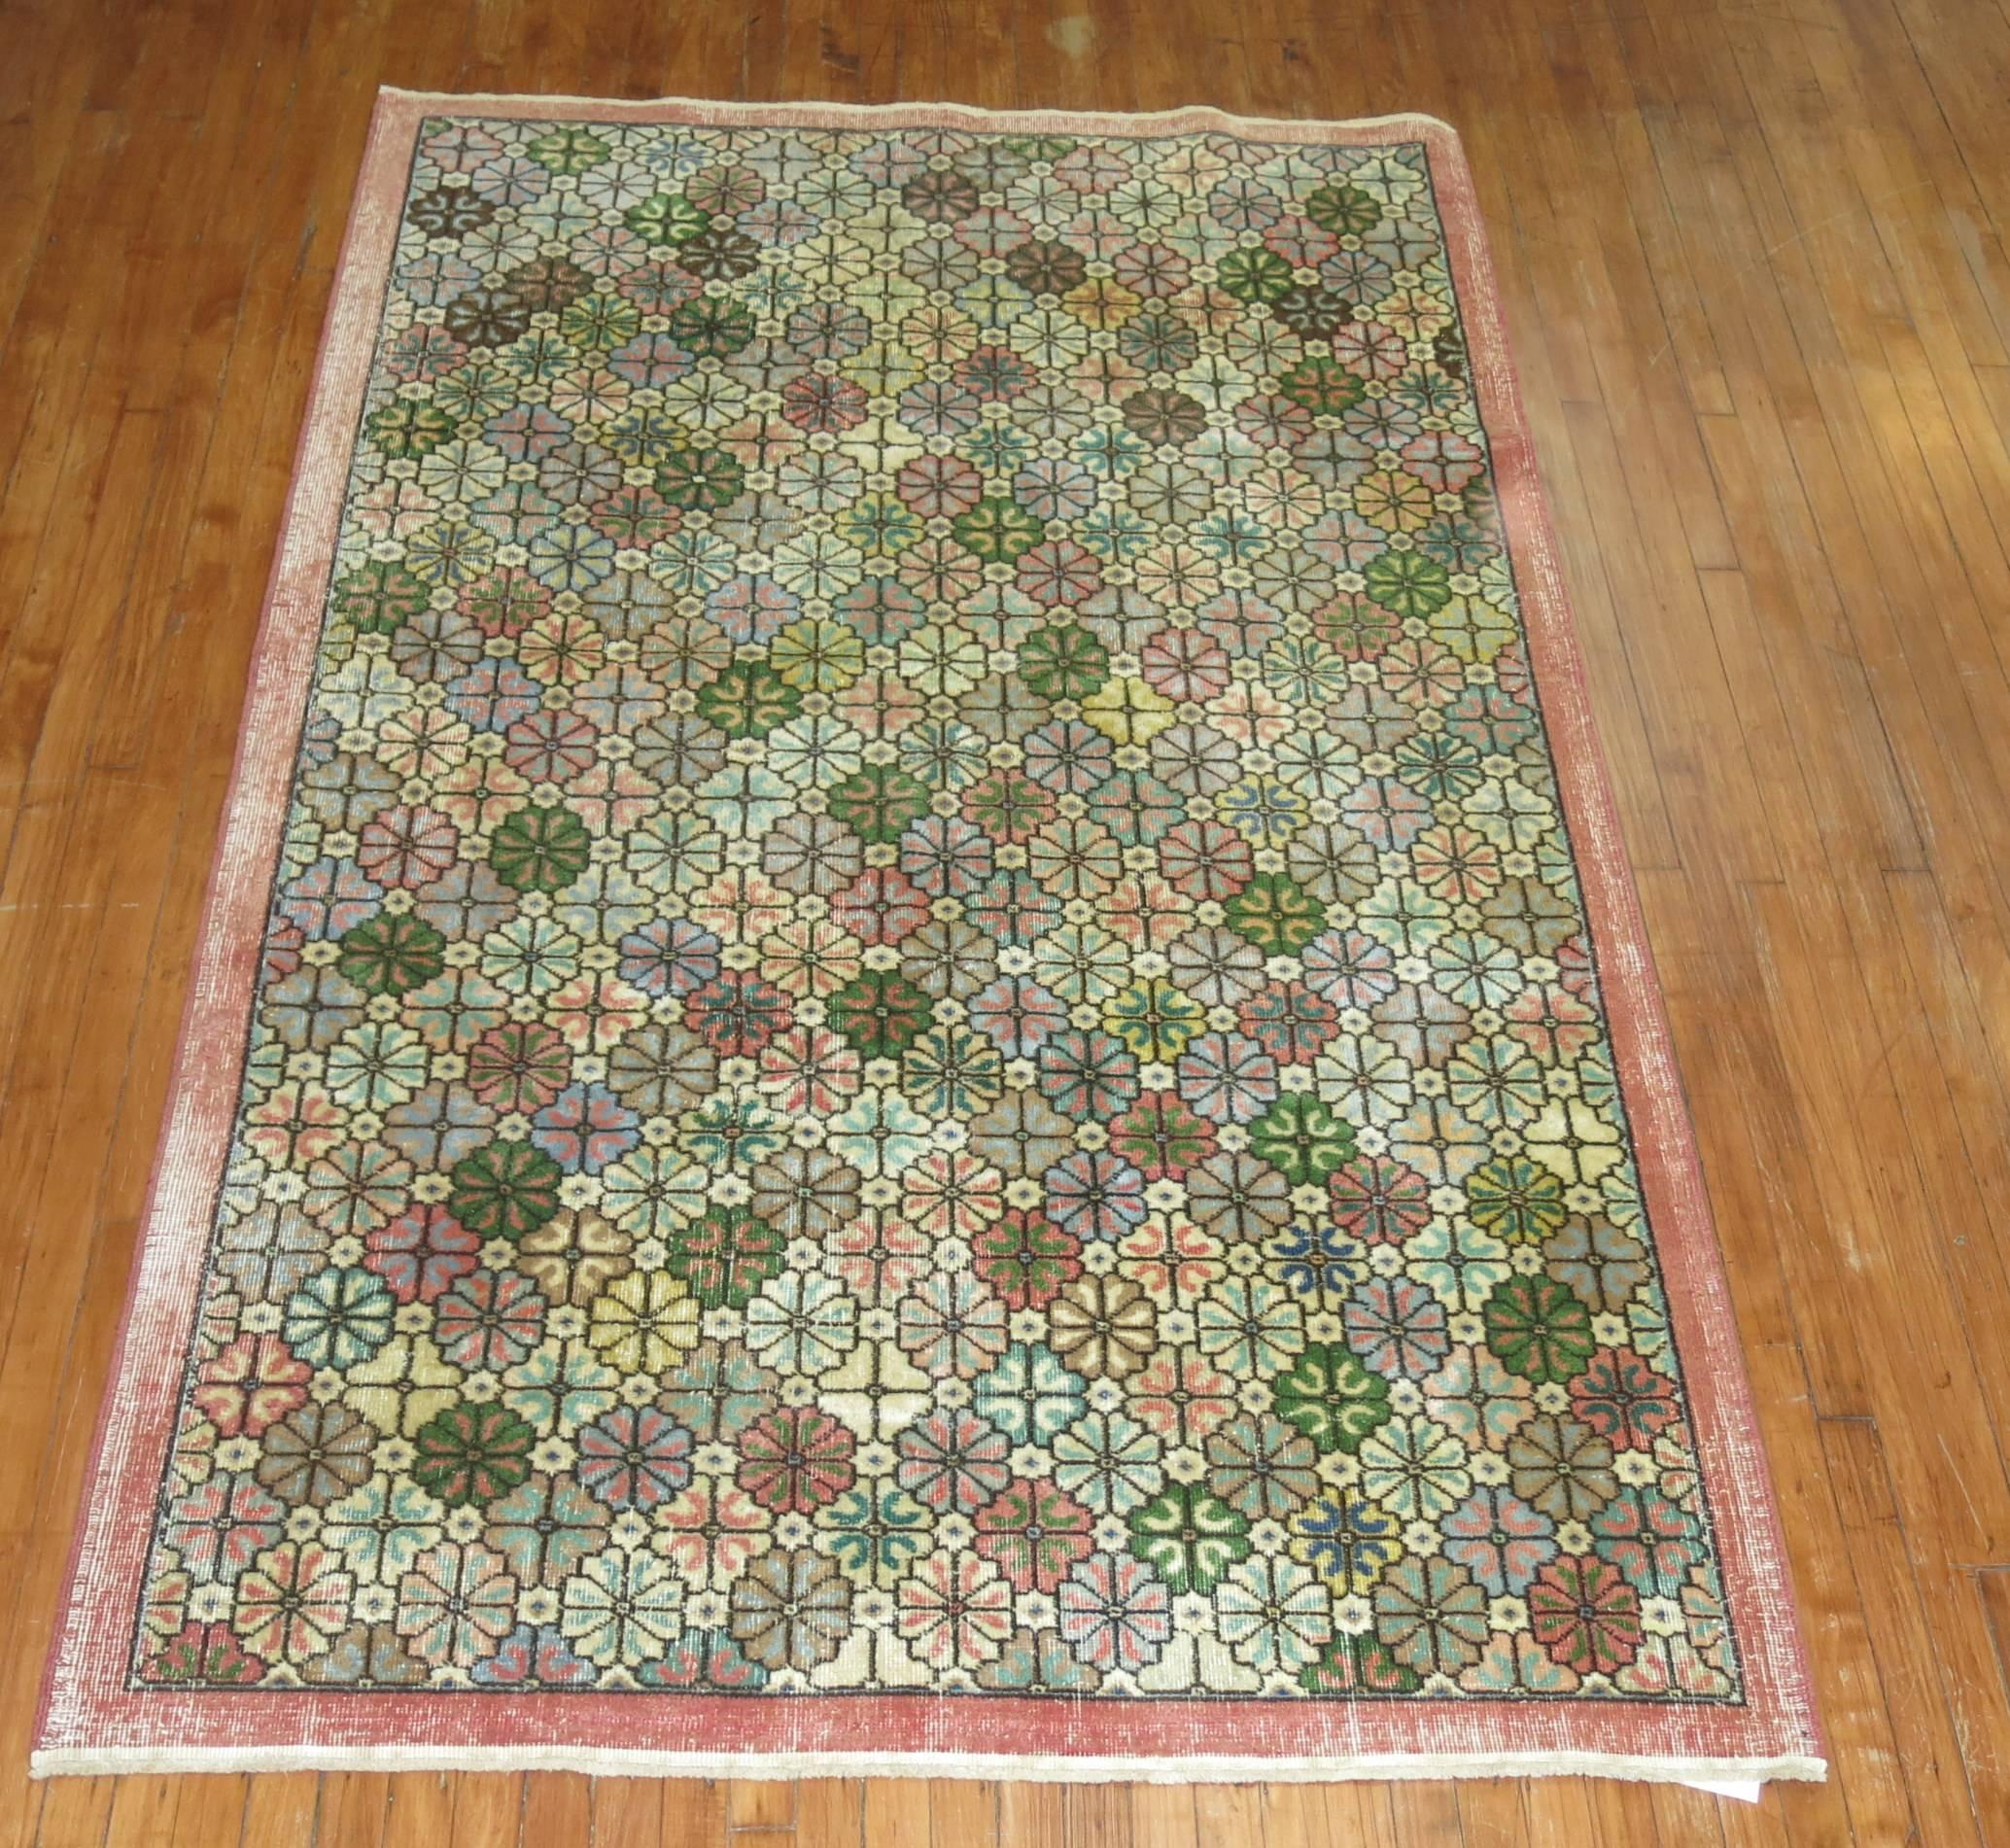 Vintage Turkish Deco rug with an all-over repetitive design in feminine colors.

5'2'' x 8'6''